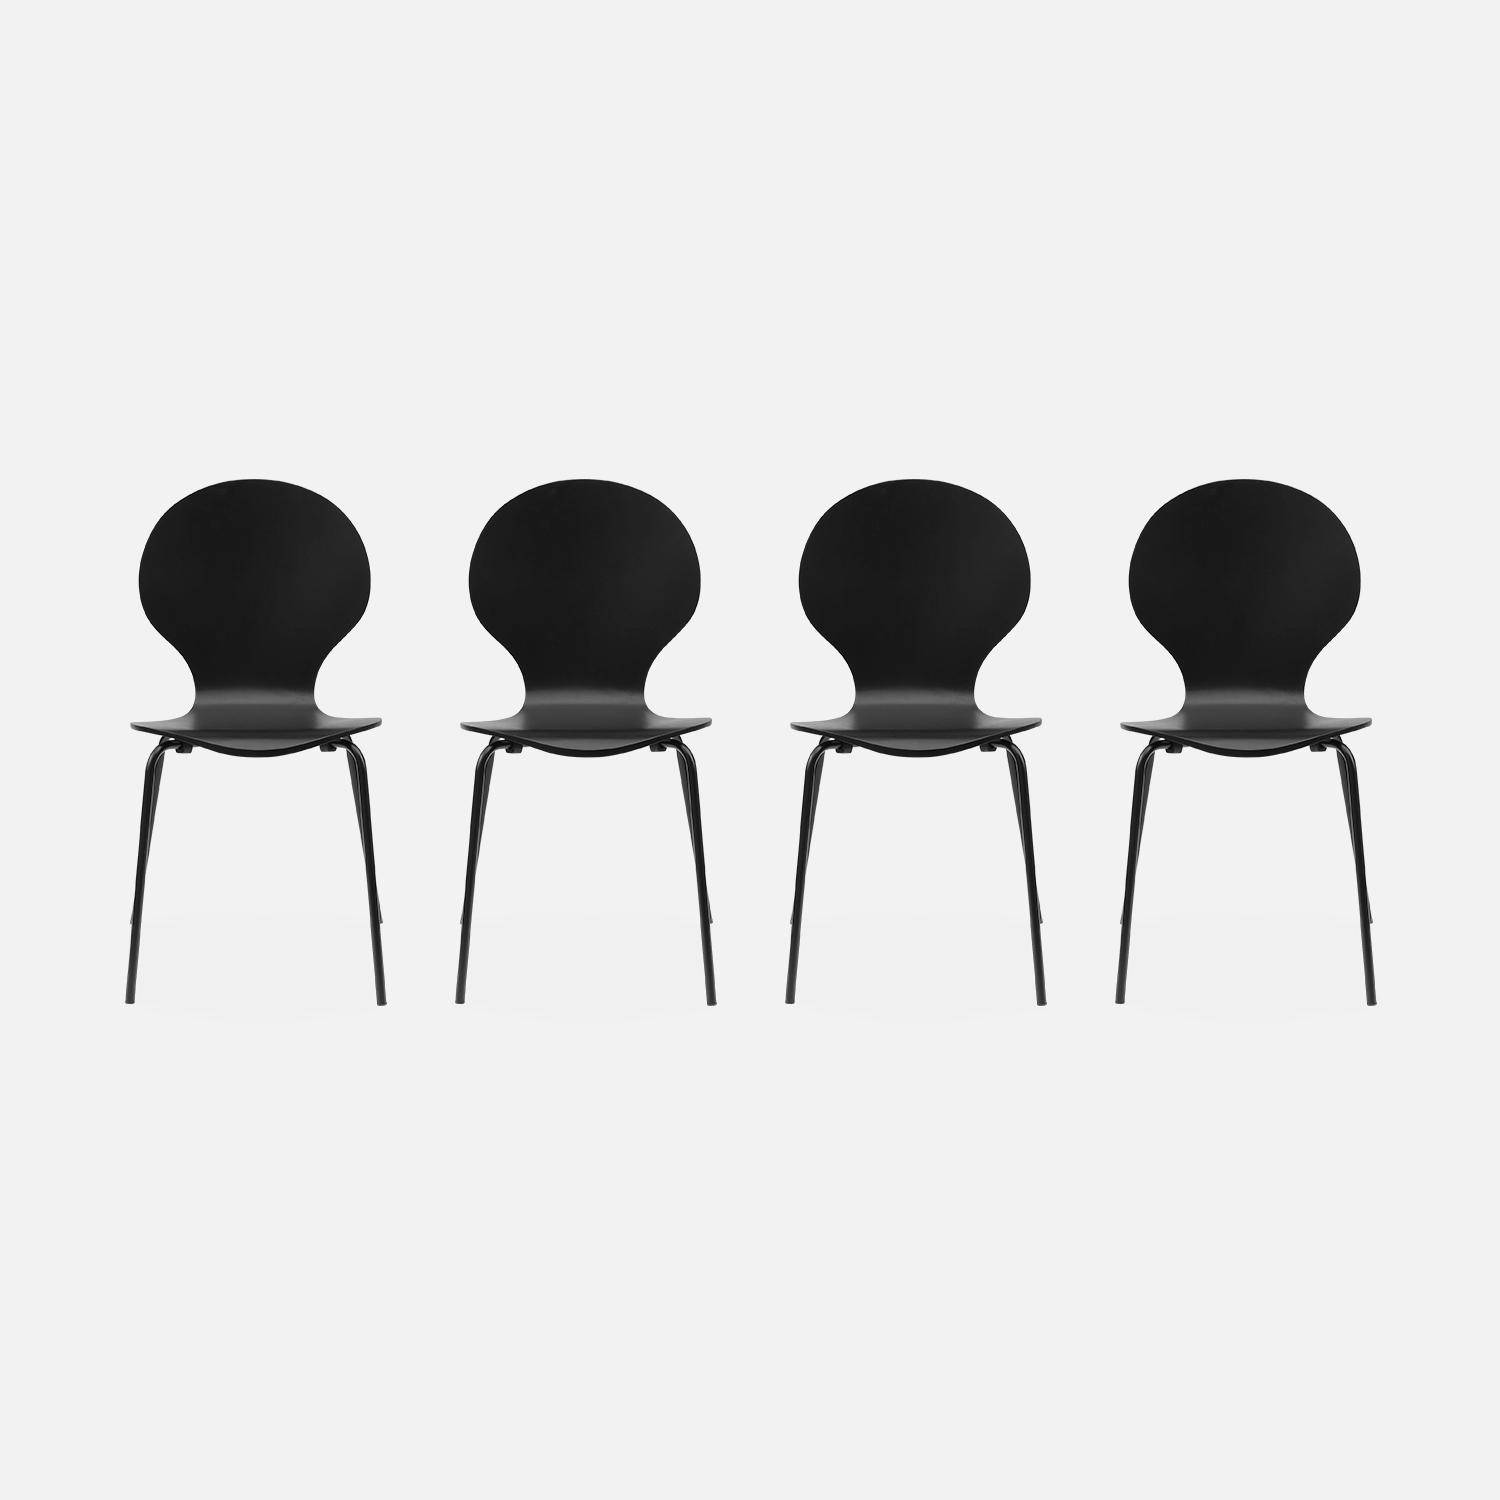 Set of 4 stackable Retro Chairs, Wood and Plywood, black,  L43 x W48 x H87cm,sweeek,Photo3